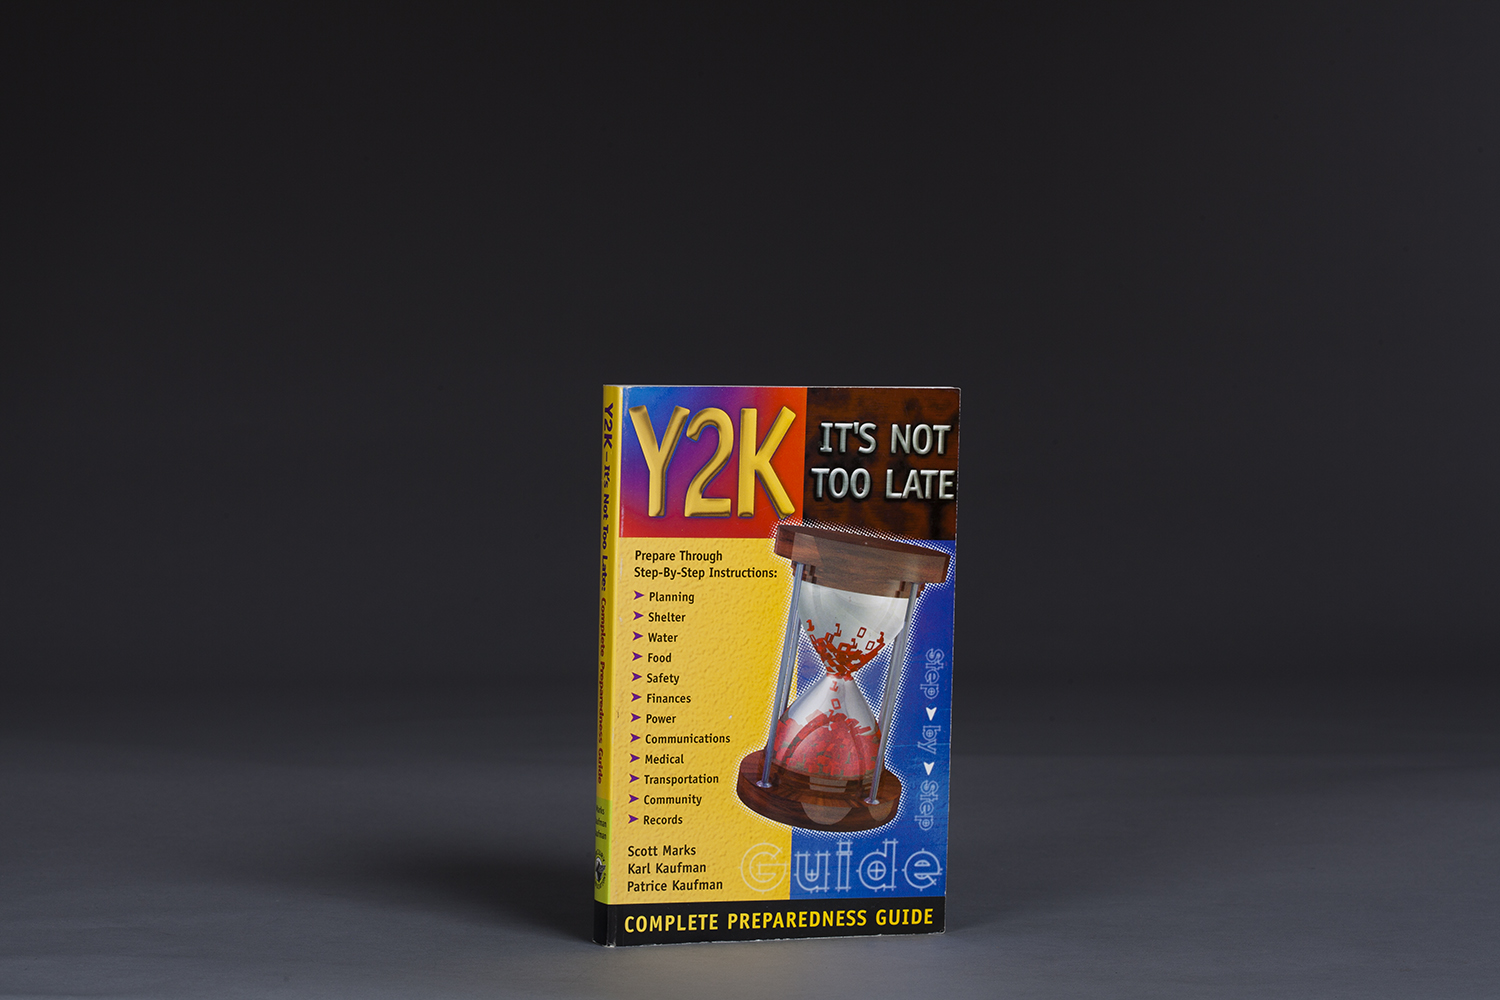 Y2K It's Not Too Late - 0377 Cover.jpg